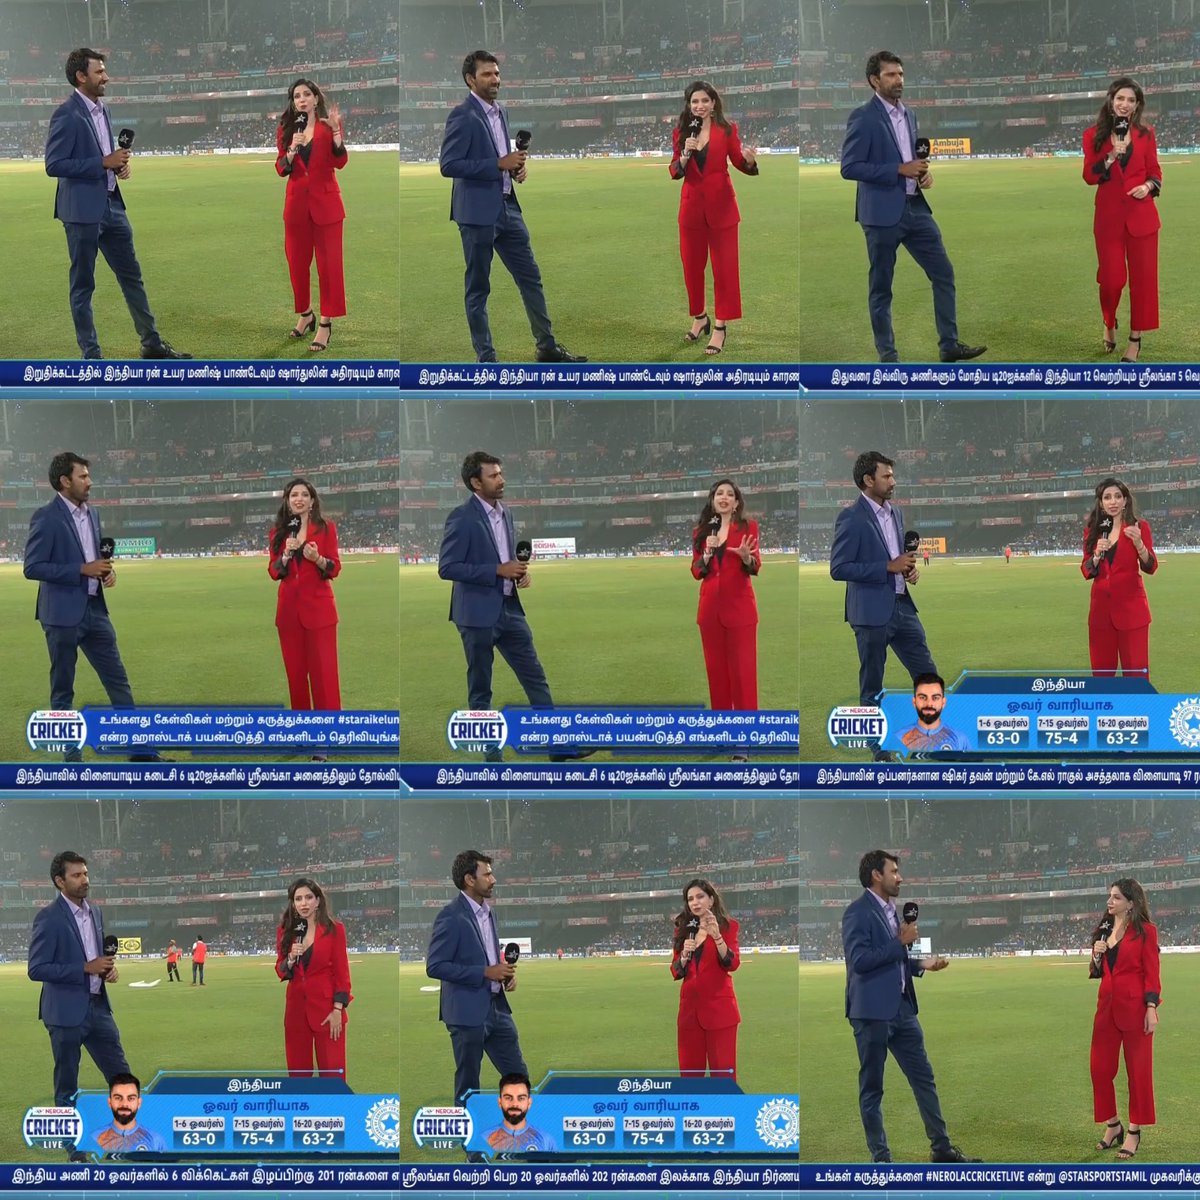 .@Bhavna__B Princess in Red❤😇Looked Very Gorgeous😍 & Short Sweet Mid Show Bhavs👍👌👏Happyy To See You😊Back Again in First Cricket Show of 2020👰😍😘💖💗💝💓💘💞💕#INDvSL #StatisticsHolder #EverGorgeous #WonderfulAnchor #NerolacCricketLive #BeautyQueen👑 @StarSportsTamil